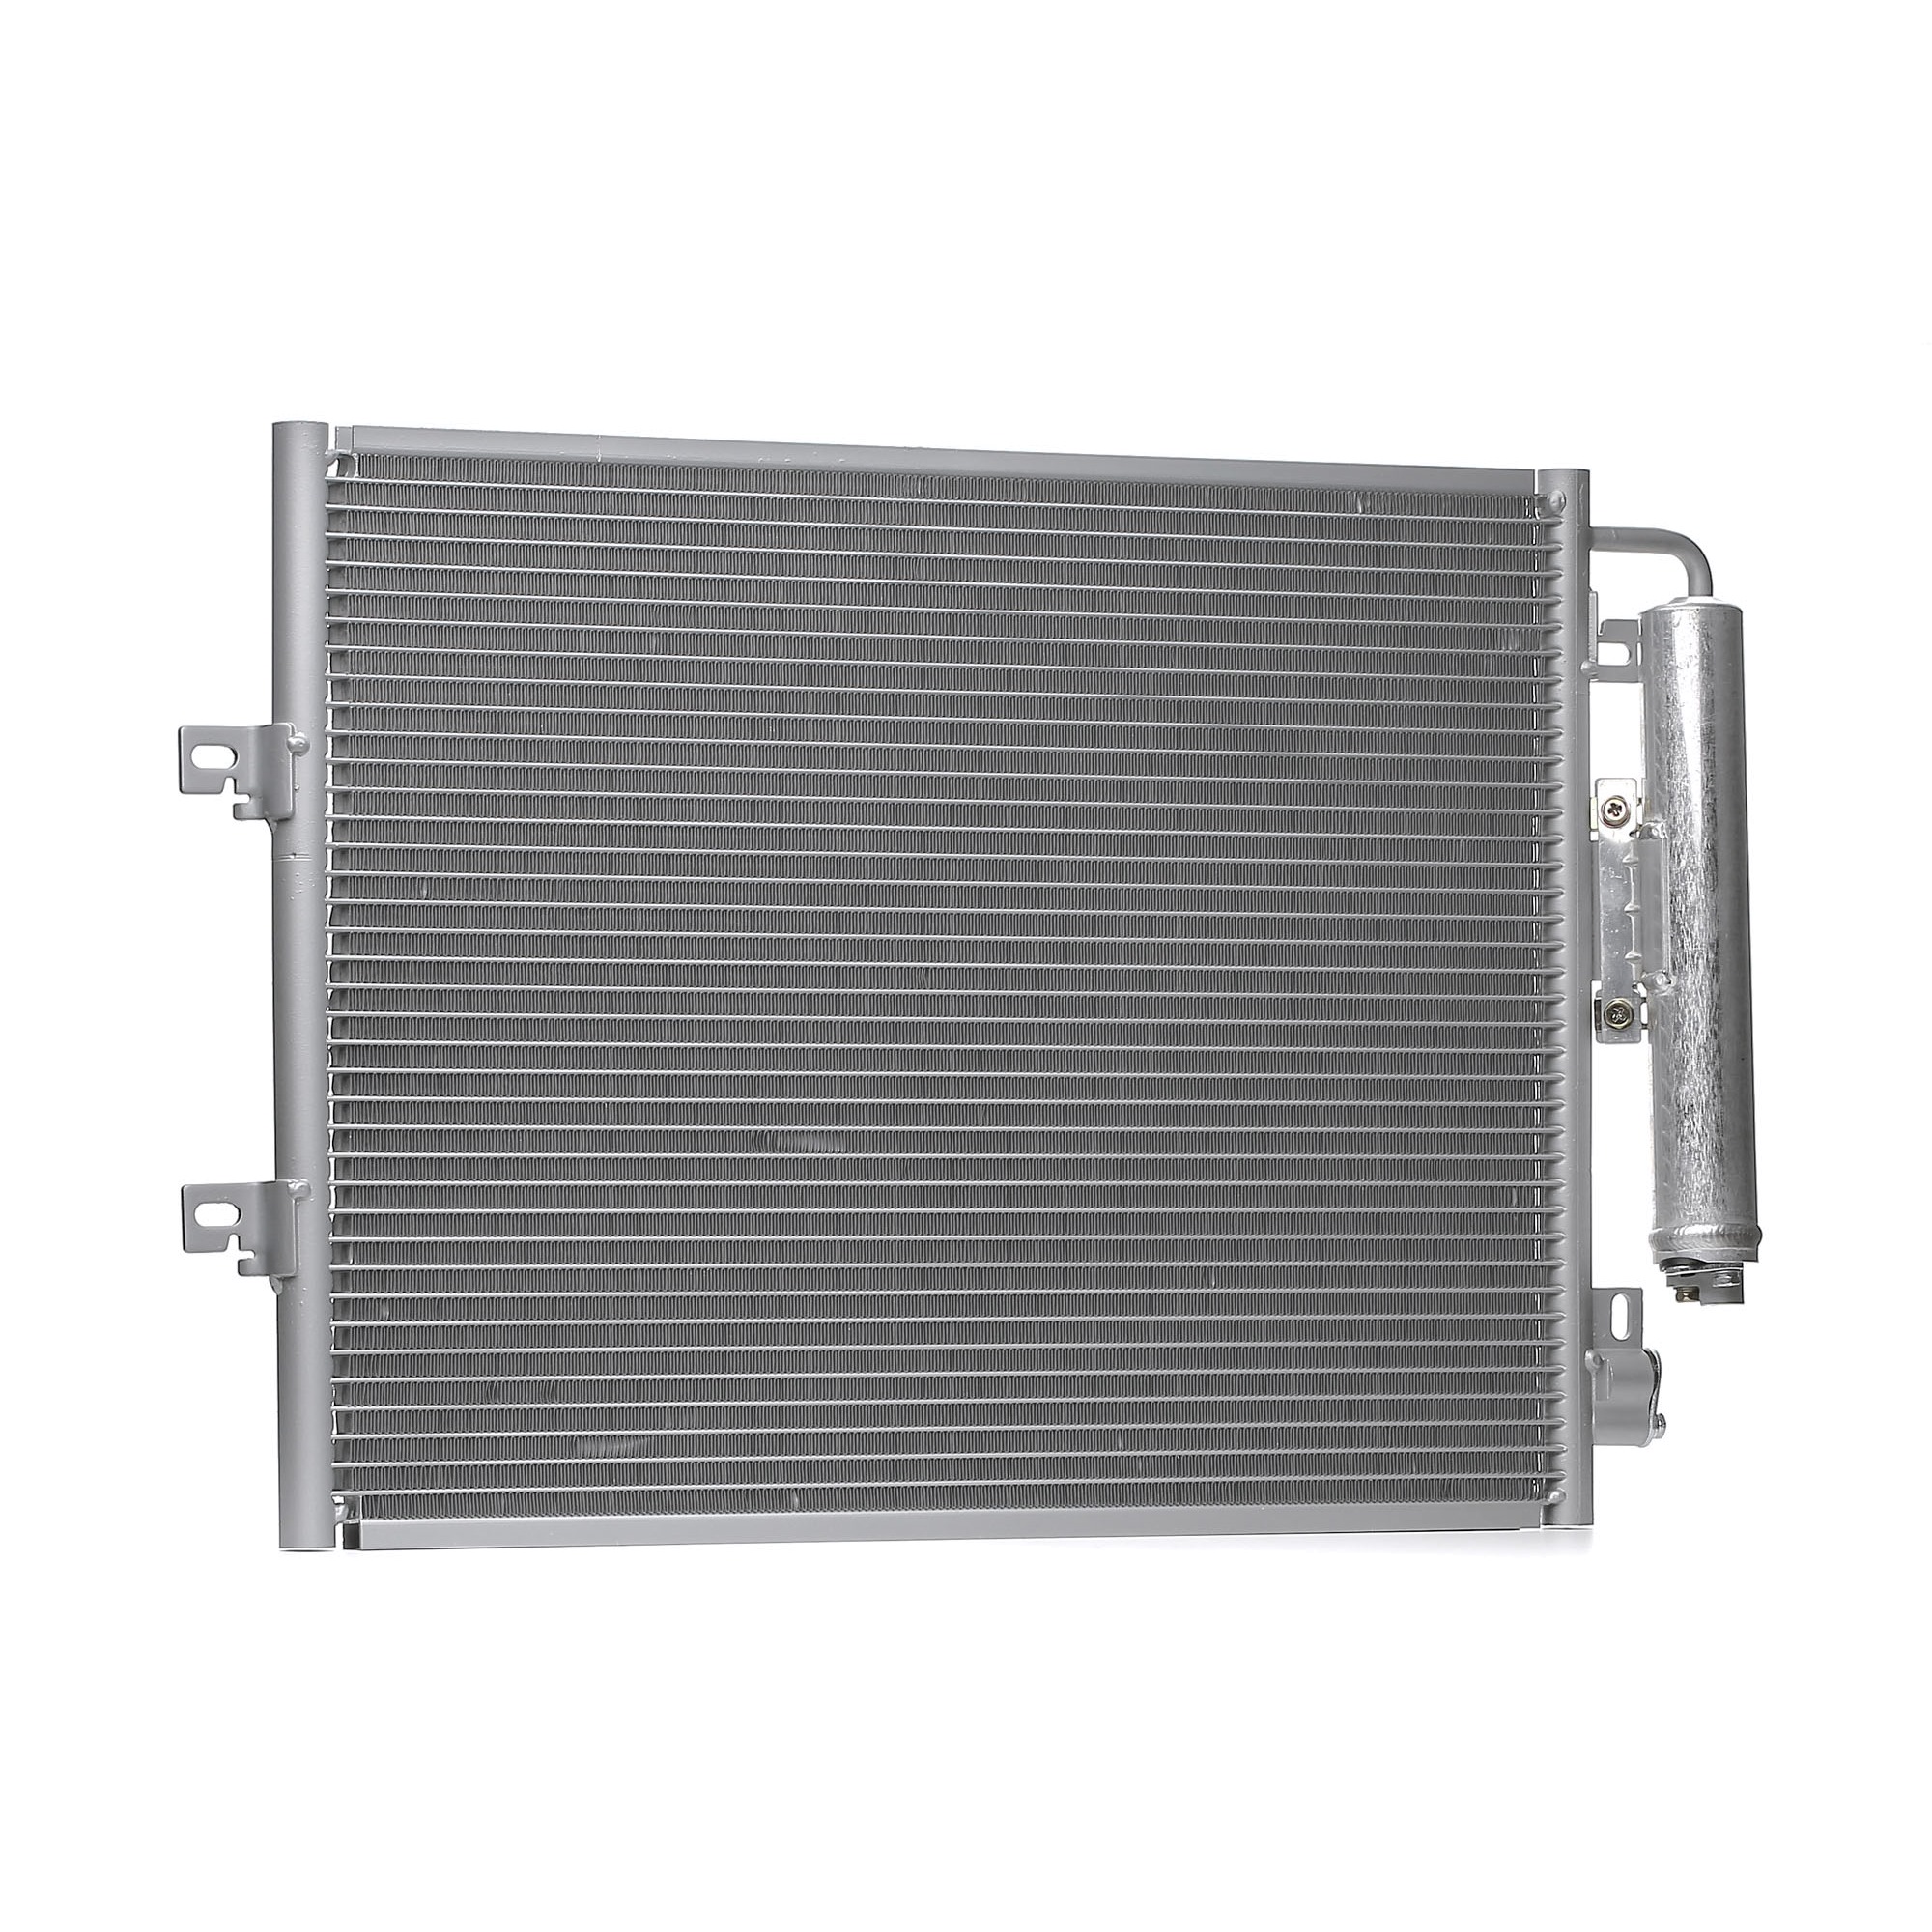 STARK SKCD-0110126 Air conditioning condenser with dryer, Aluminium, 16mm, 538mm